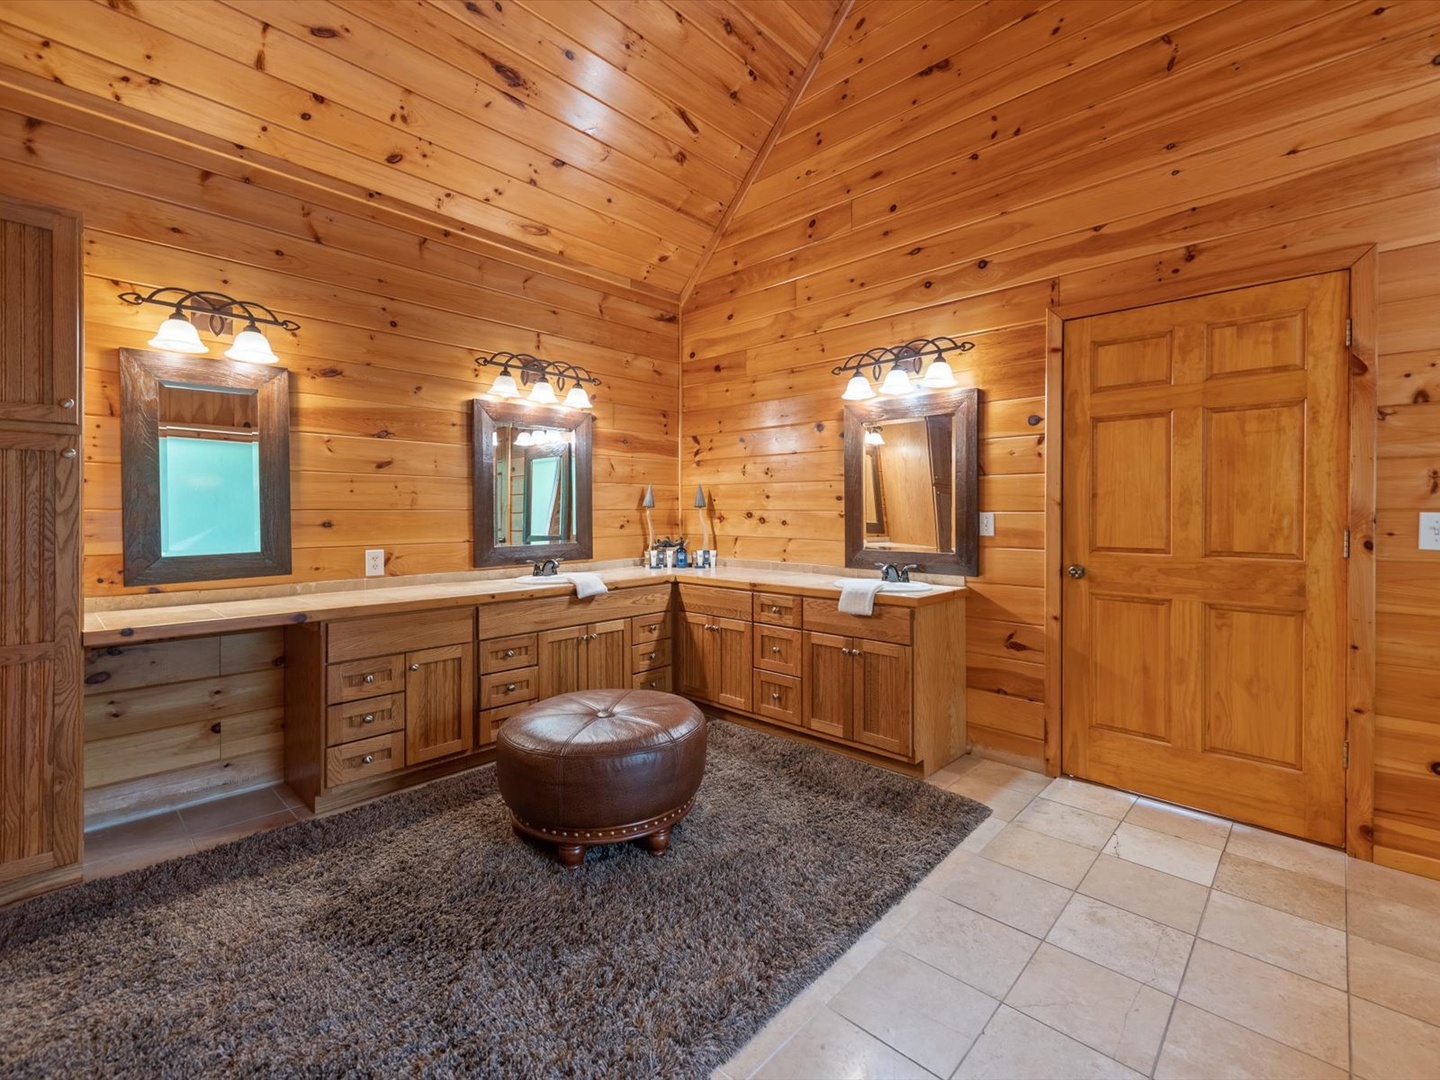 Medley Sunset Cove - Entry Level Primary King Bedroom's Private Bathroom